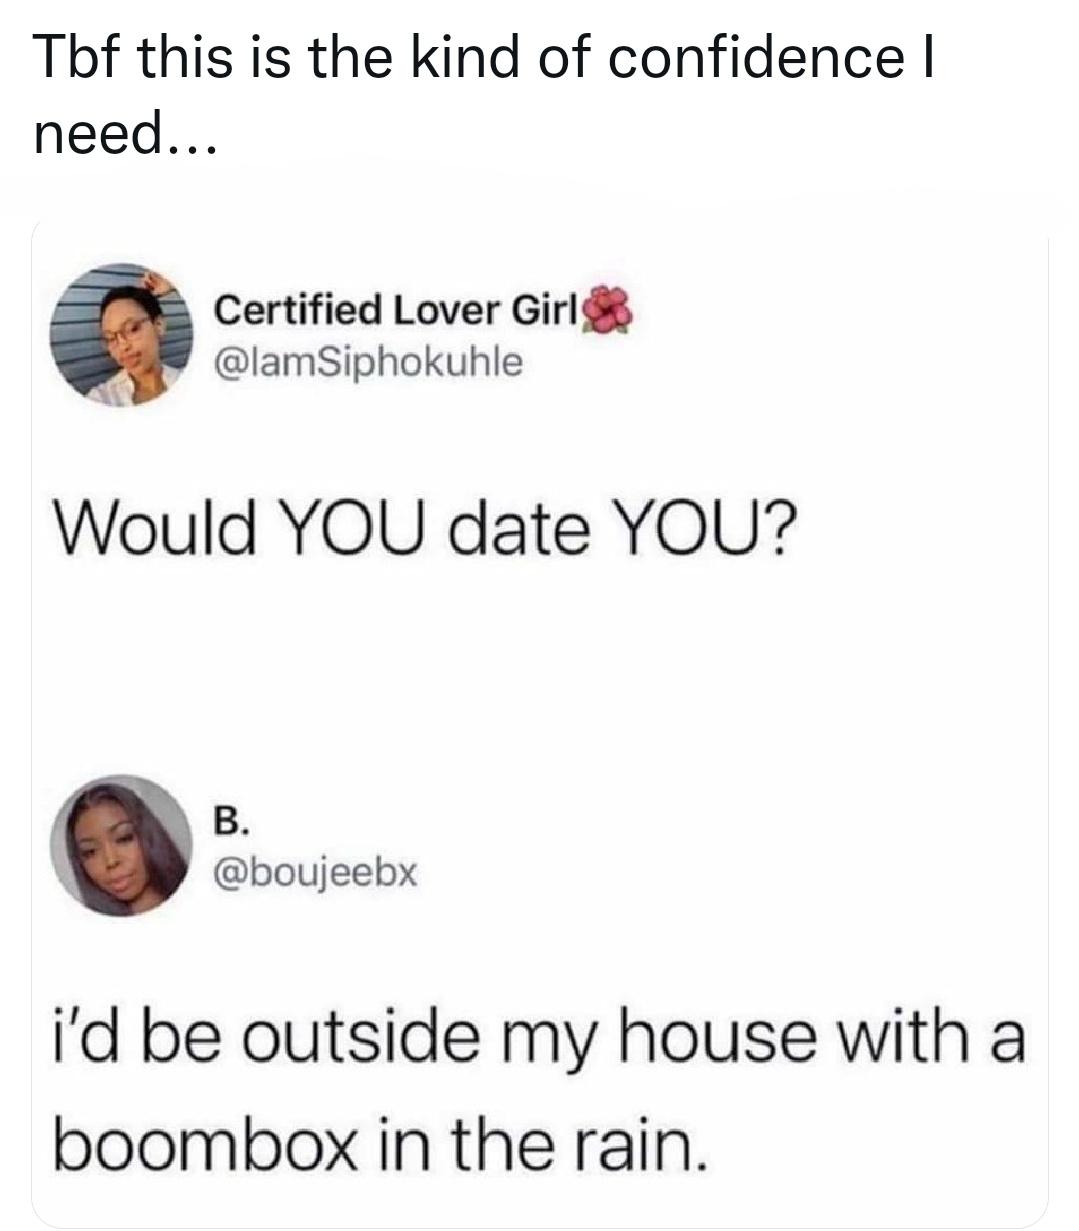 funny memes - Tbf this is the kind of confidence need... Certified Lover Girl Would You date You? B. i'd be outside my house with a boombox in the rain.